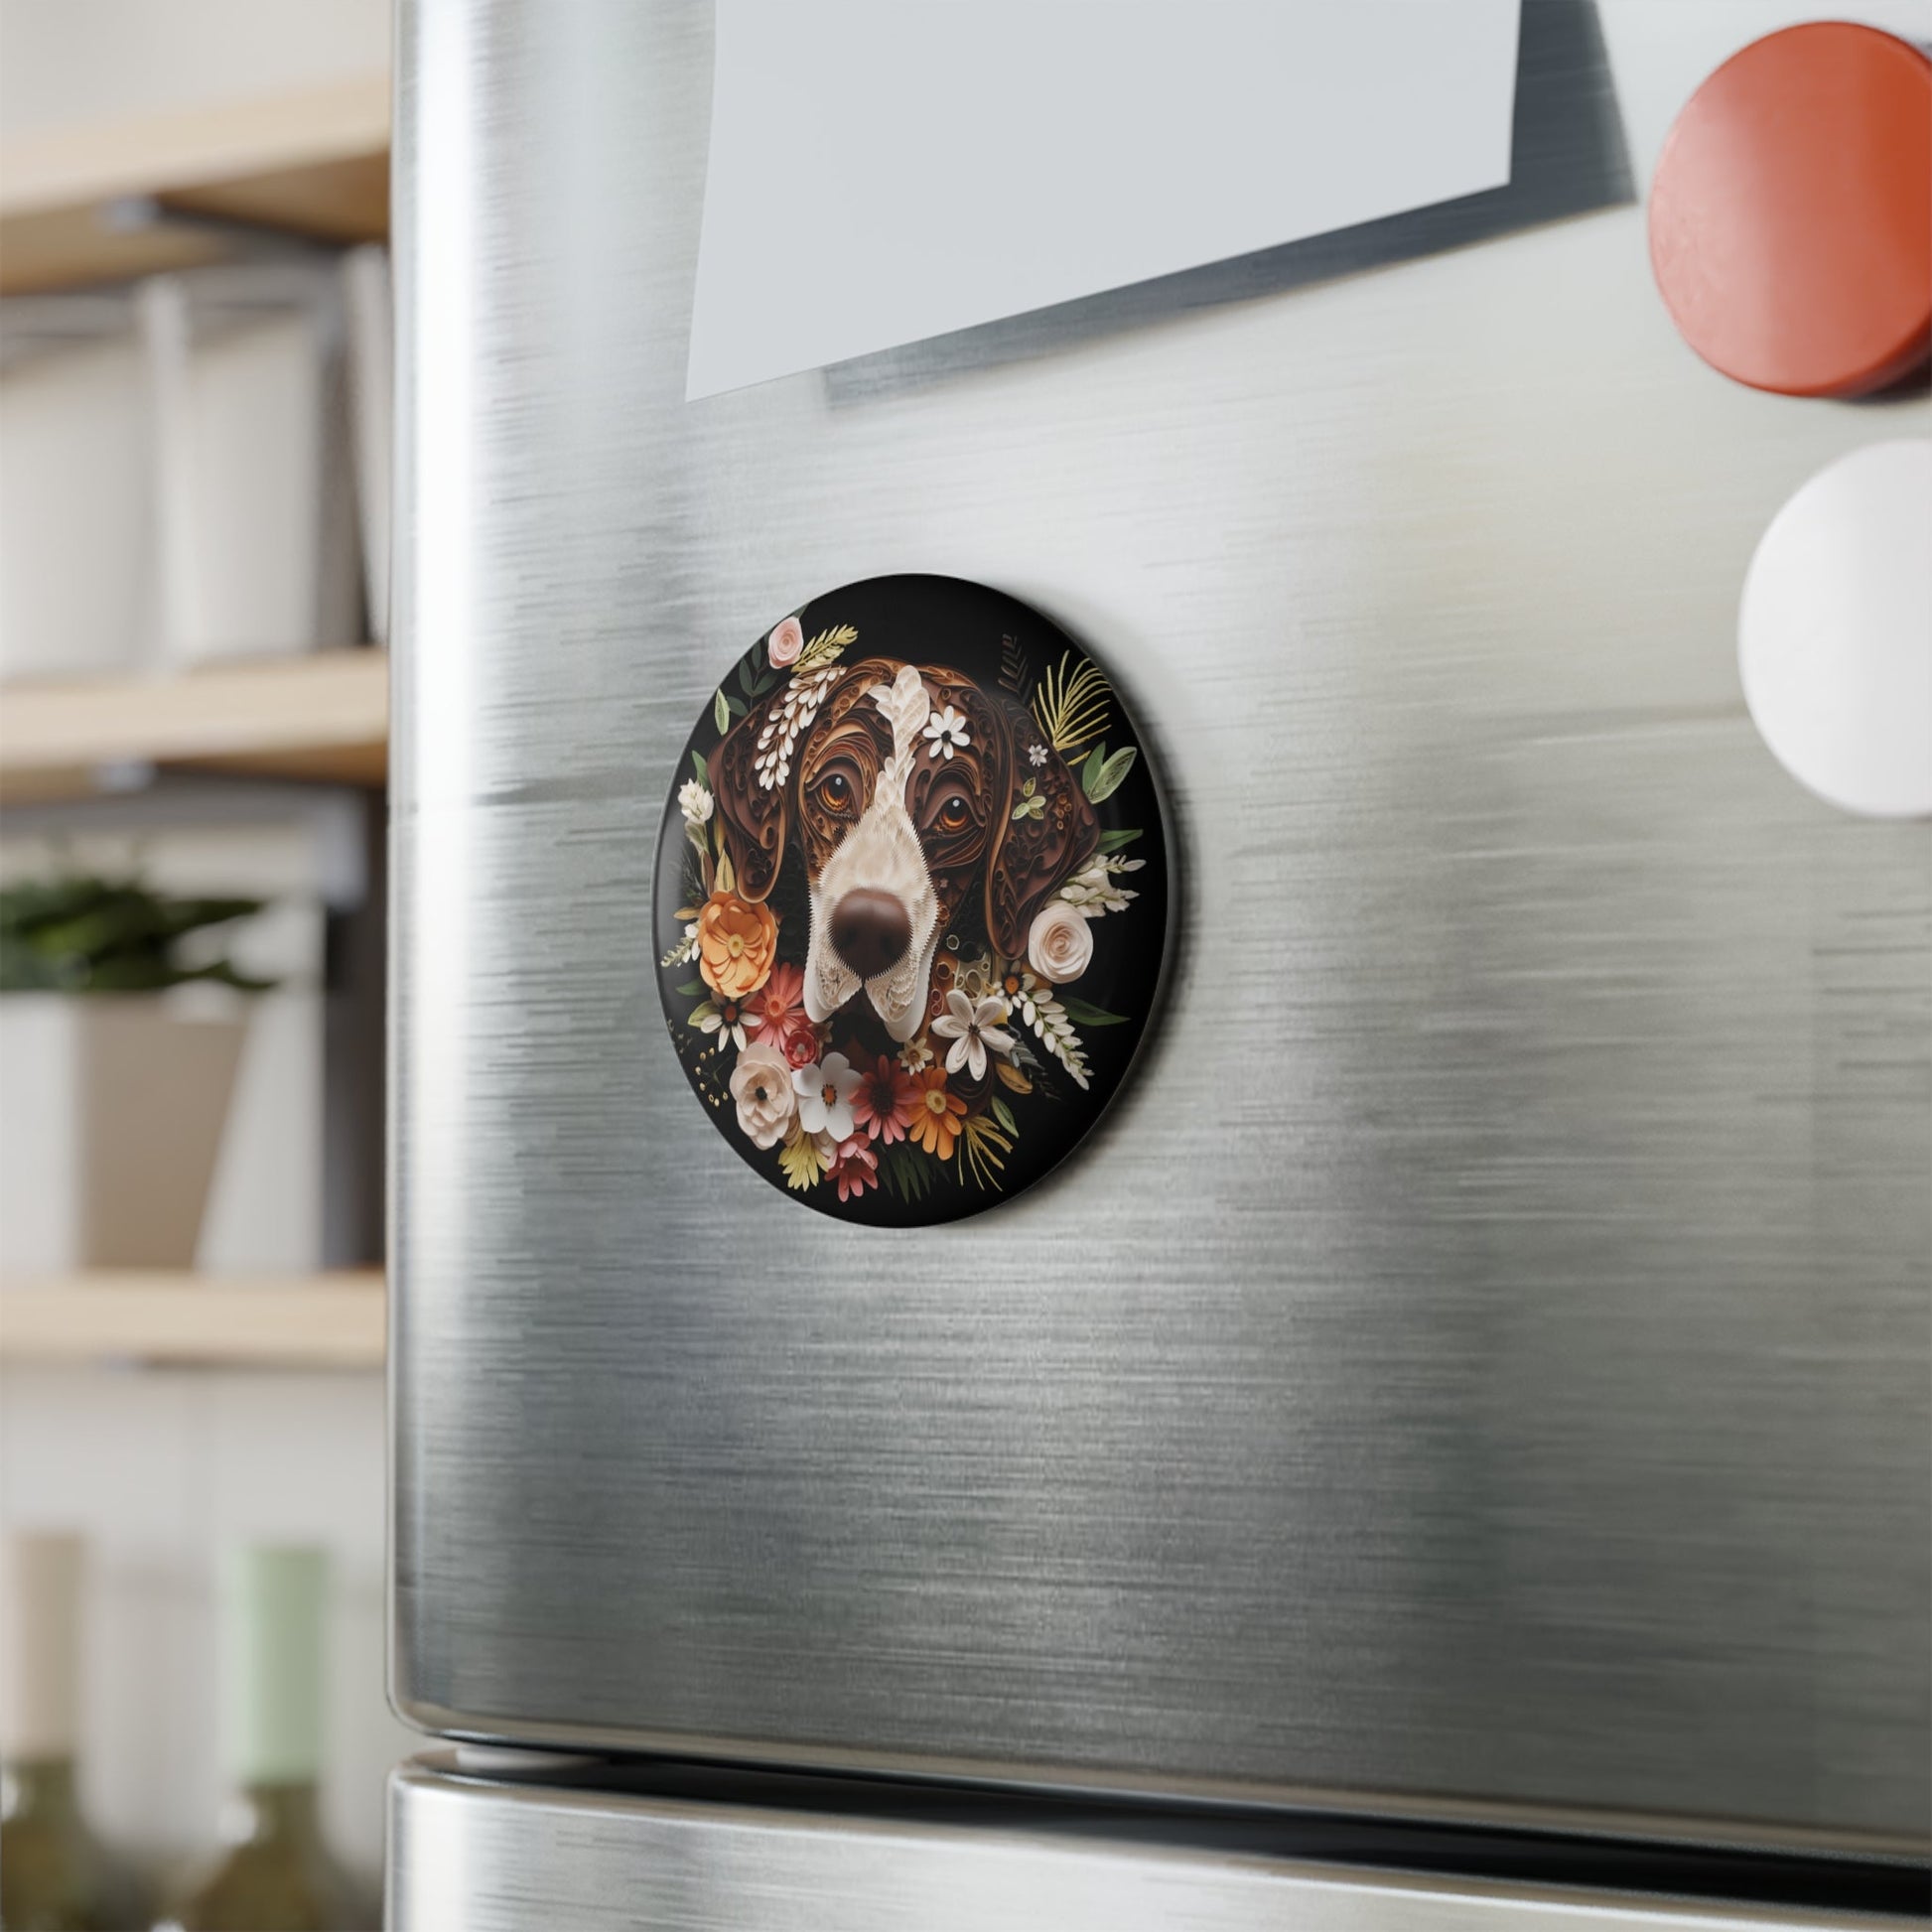 Round Button Fridge Magnet featuring a German Short Haired Pointer Paper Quilling Design [2.25"] - Hobbster